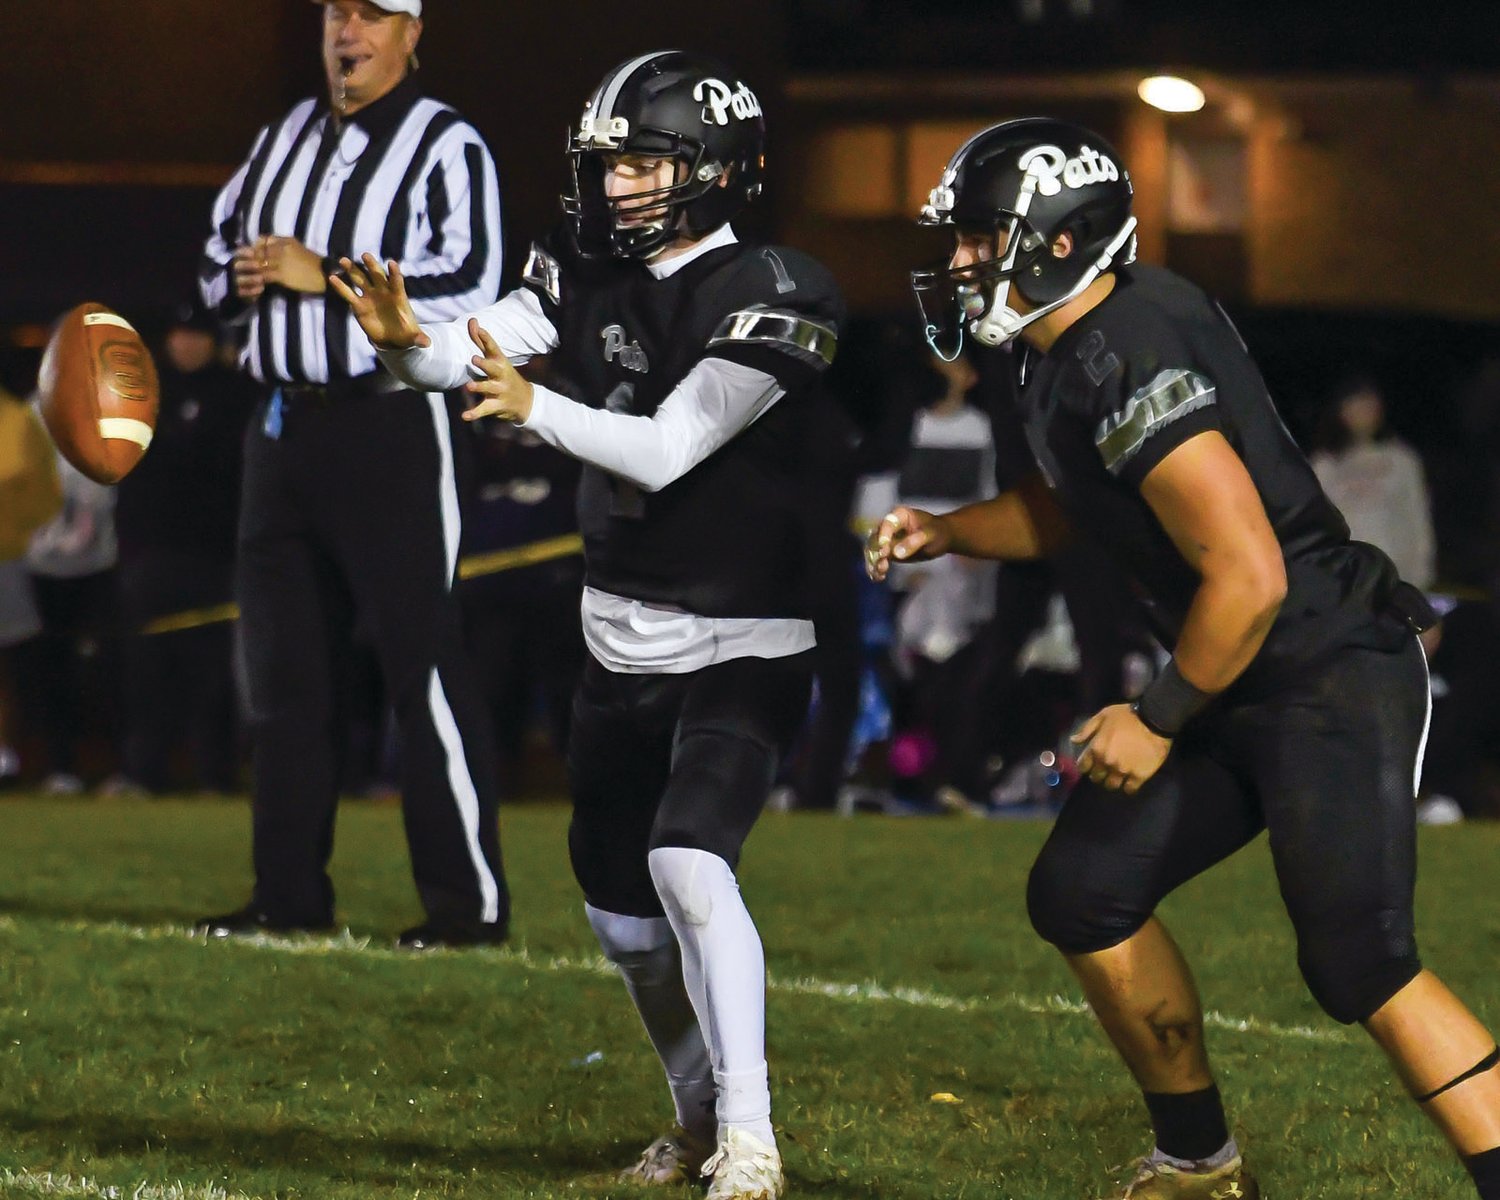 SENIOR LEADERS: Pilgrim quarterback Connor Widmer looks to take the snap to hand the ball off to Danny Halliwell.